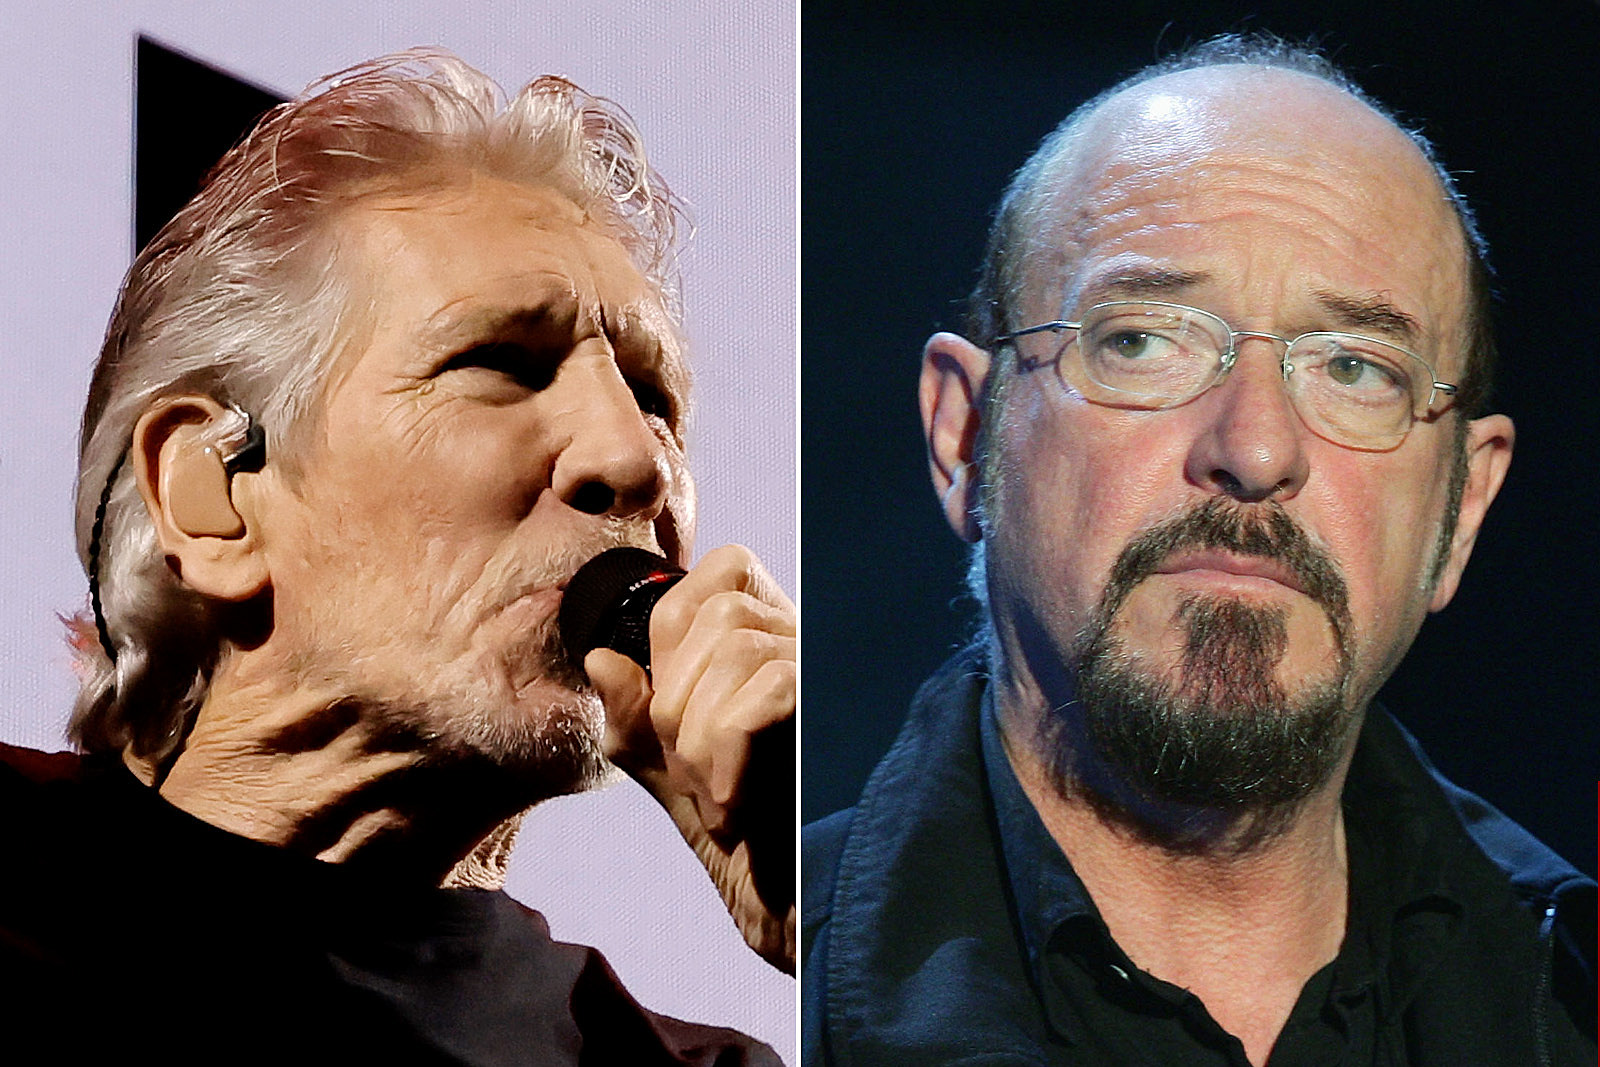 ian-anderson-confused-by-roger-waters’-political-outbursts